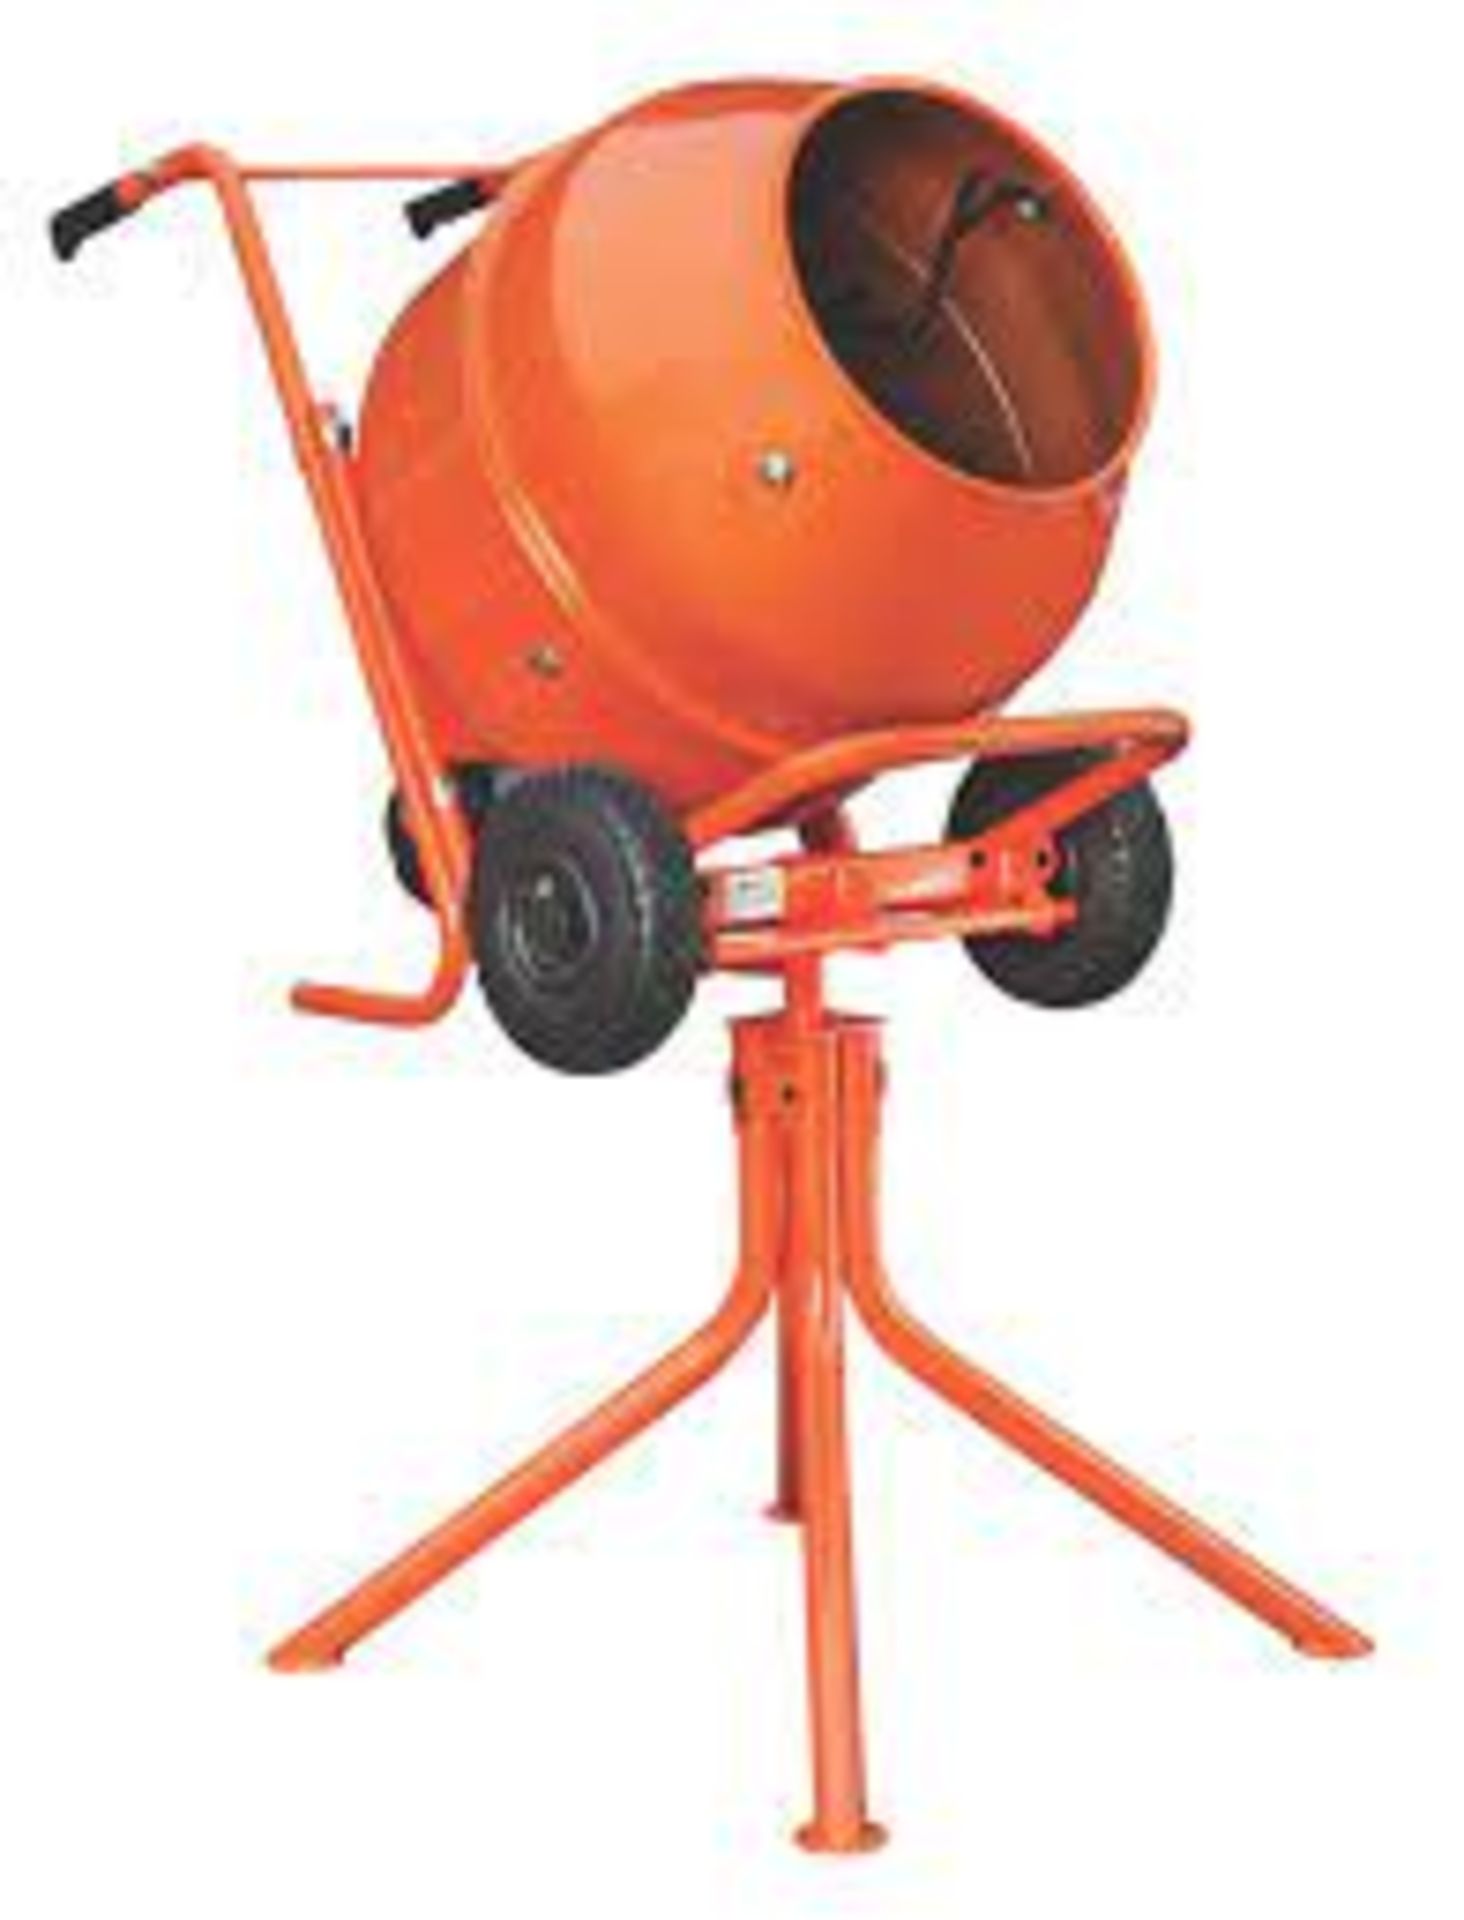 Electric Concrete Mixer. - SR4. Upright mixer for small to medium building projects. Light and